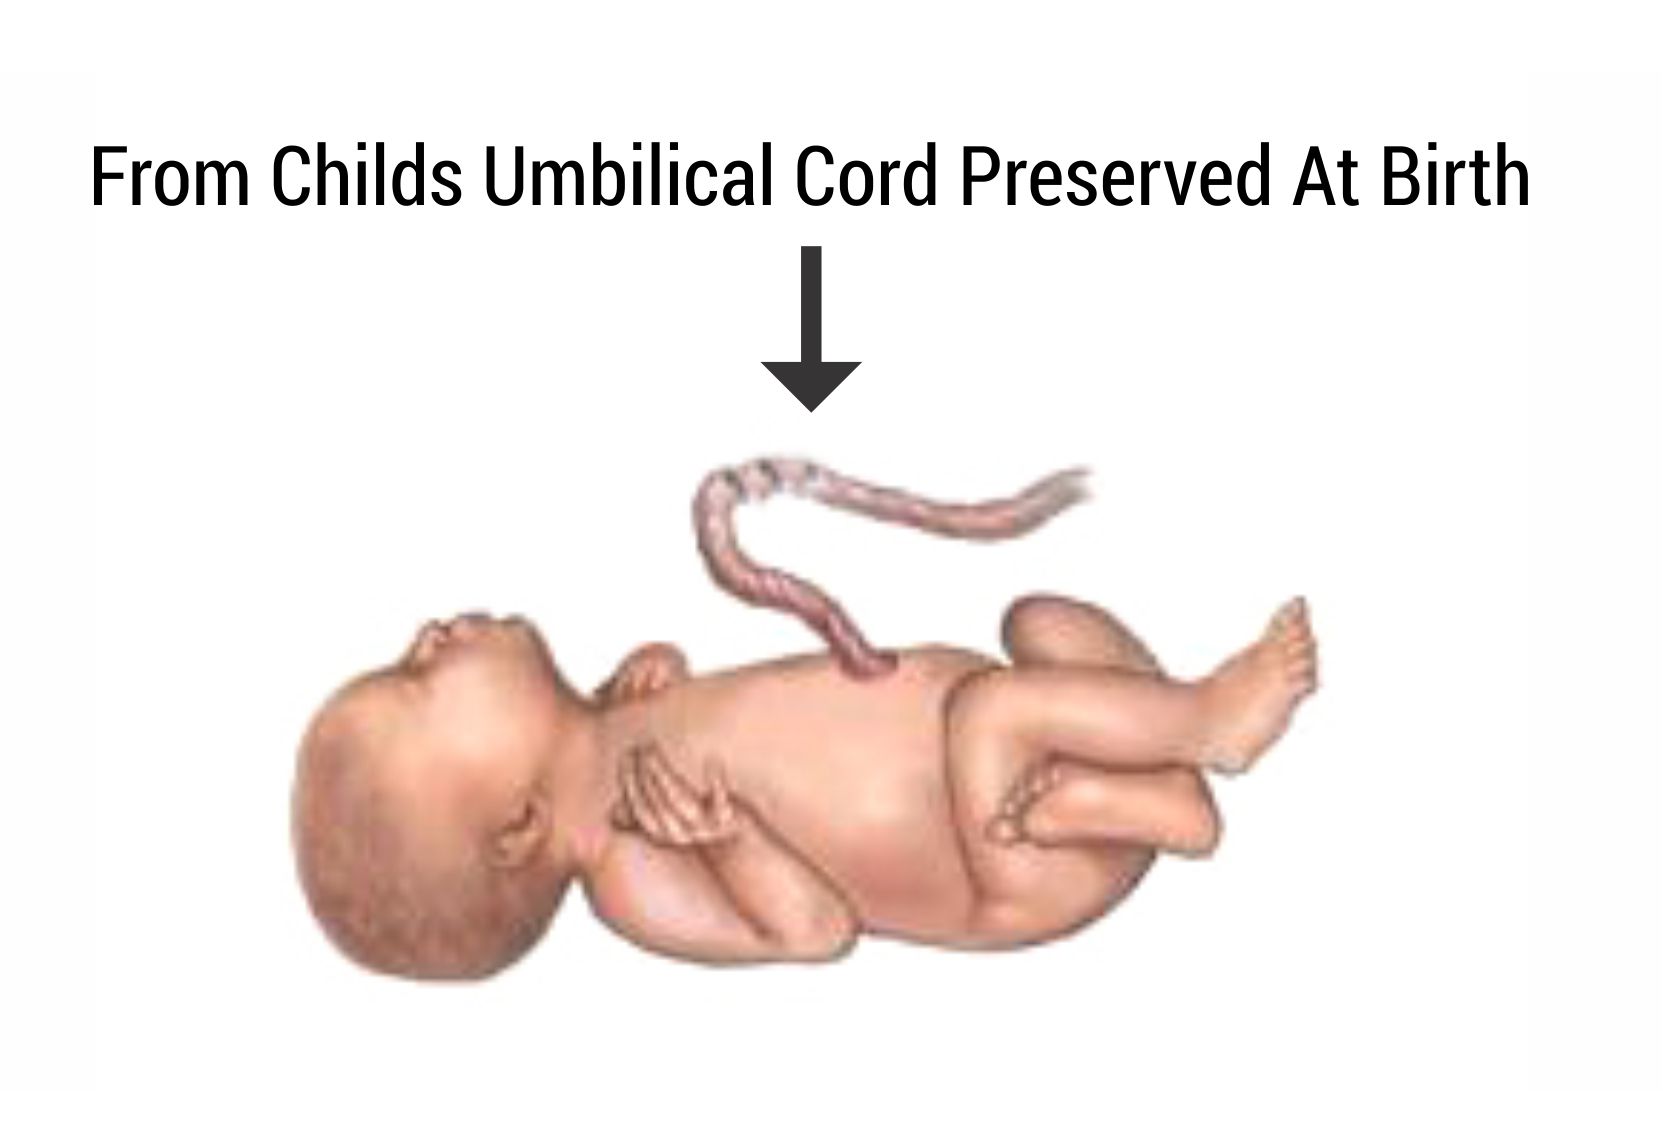 Childs Umbilical Cord, Stem Cell Treatment For Autism, Stem Cell Treatment In Autism, Autism Connect